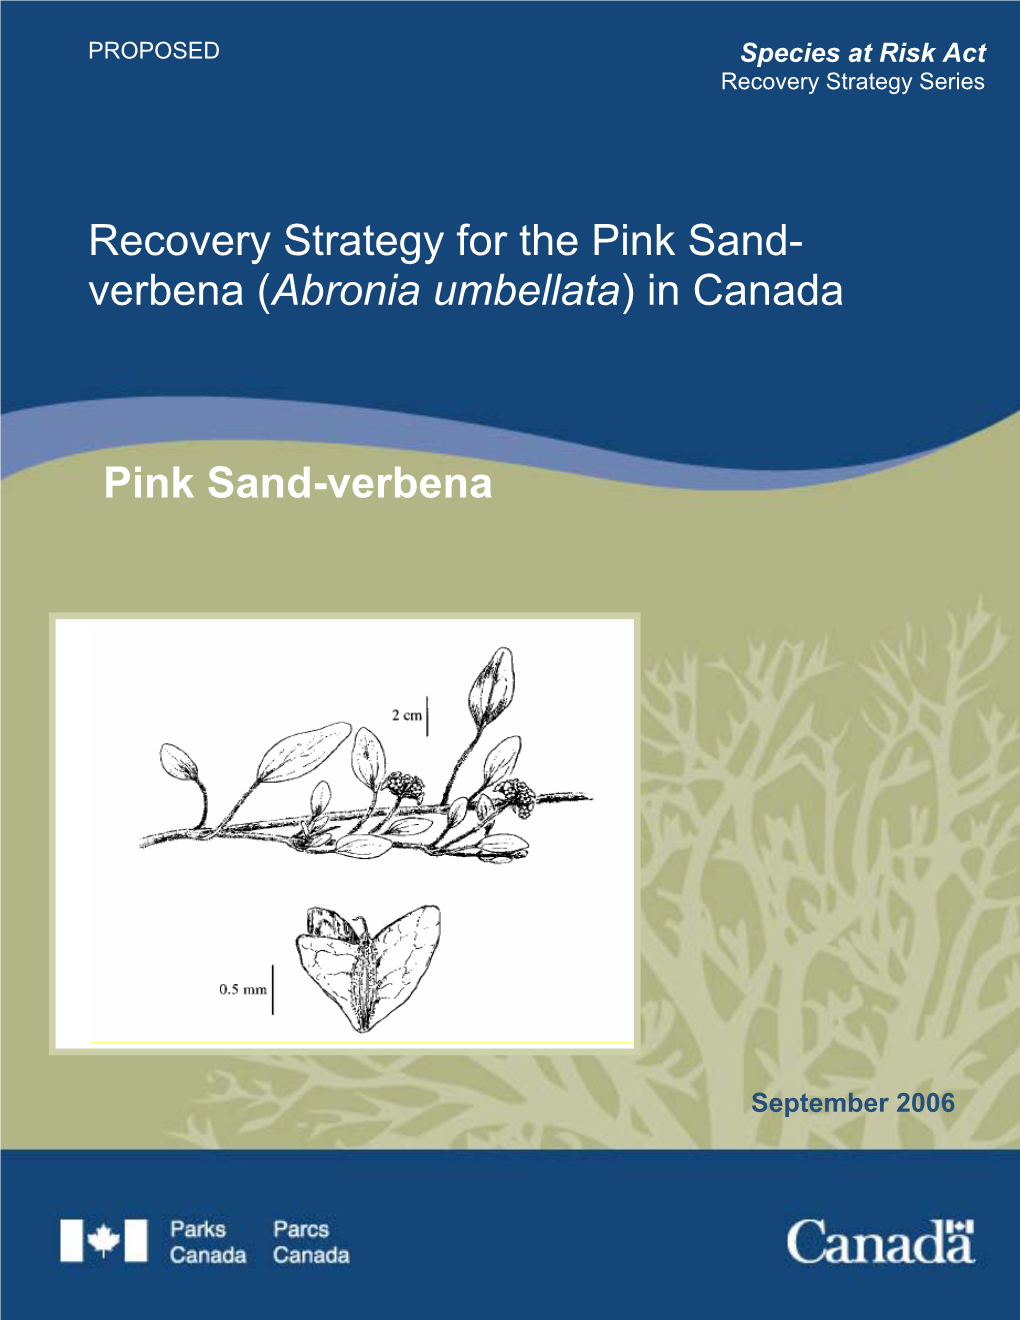 Proposed Recovery Strategy for the Pink Sand-Verbena (Abronia